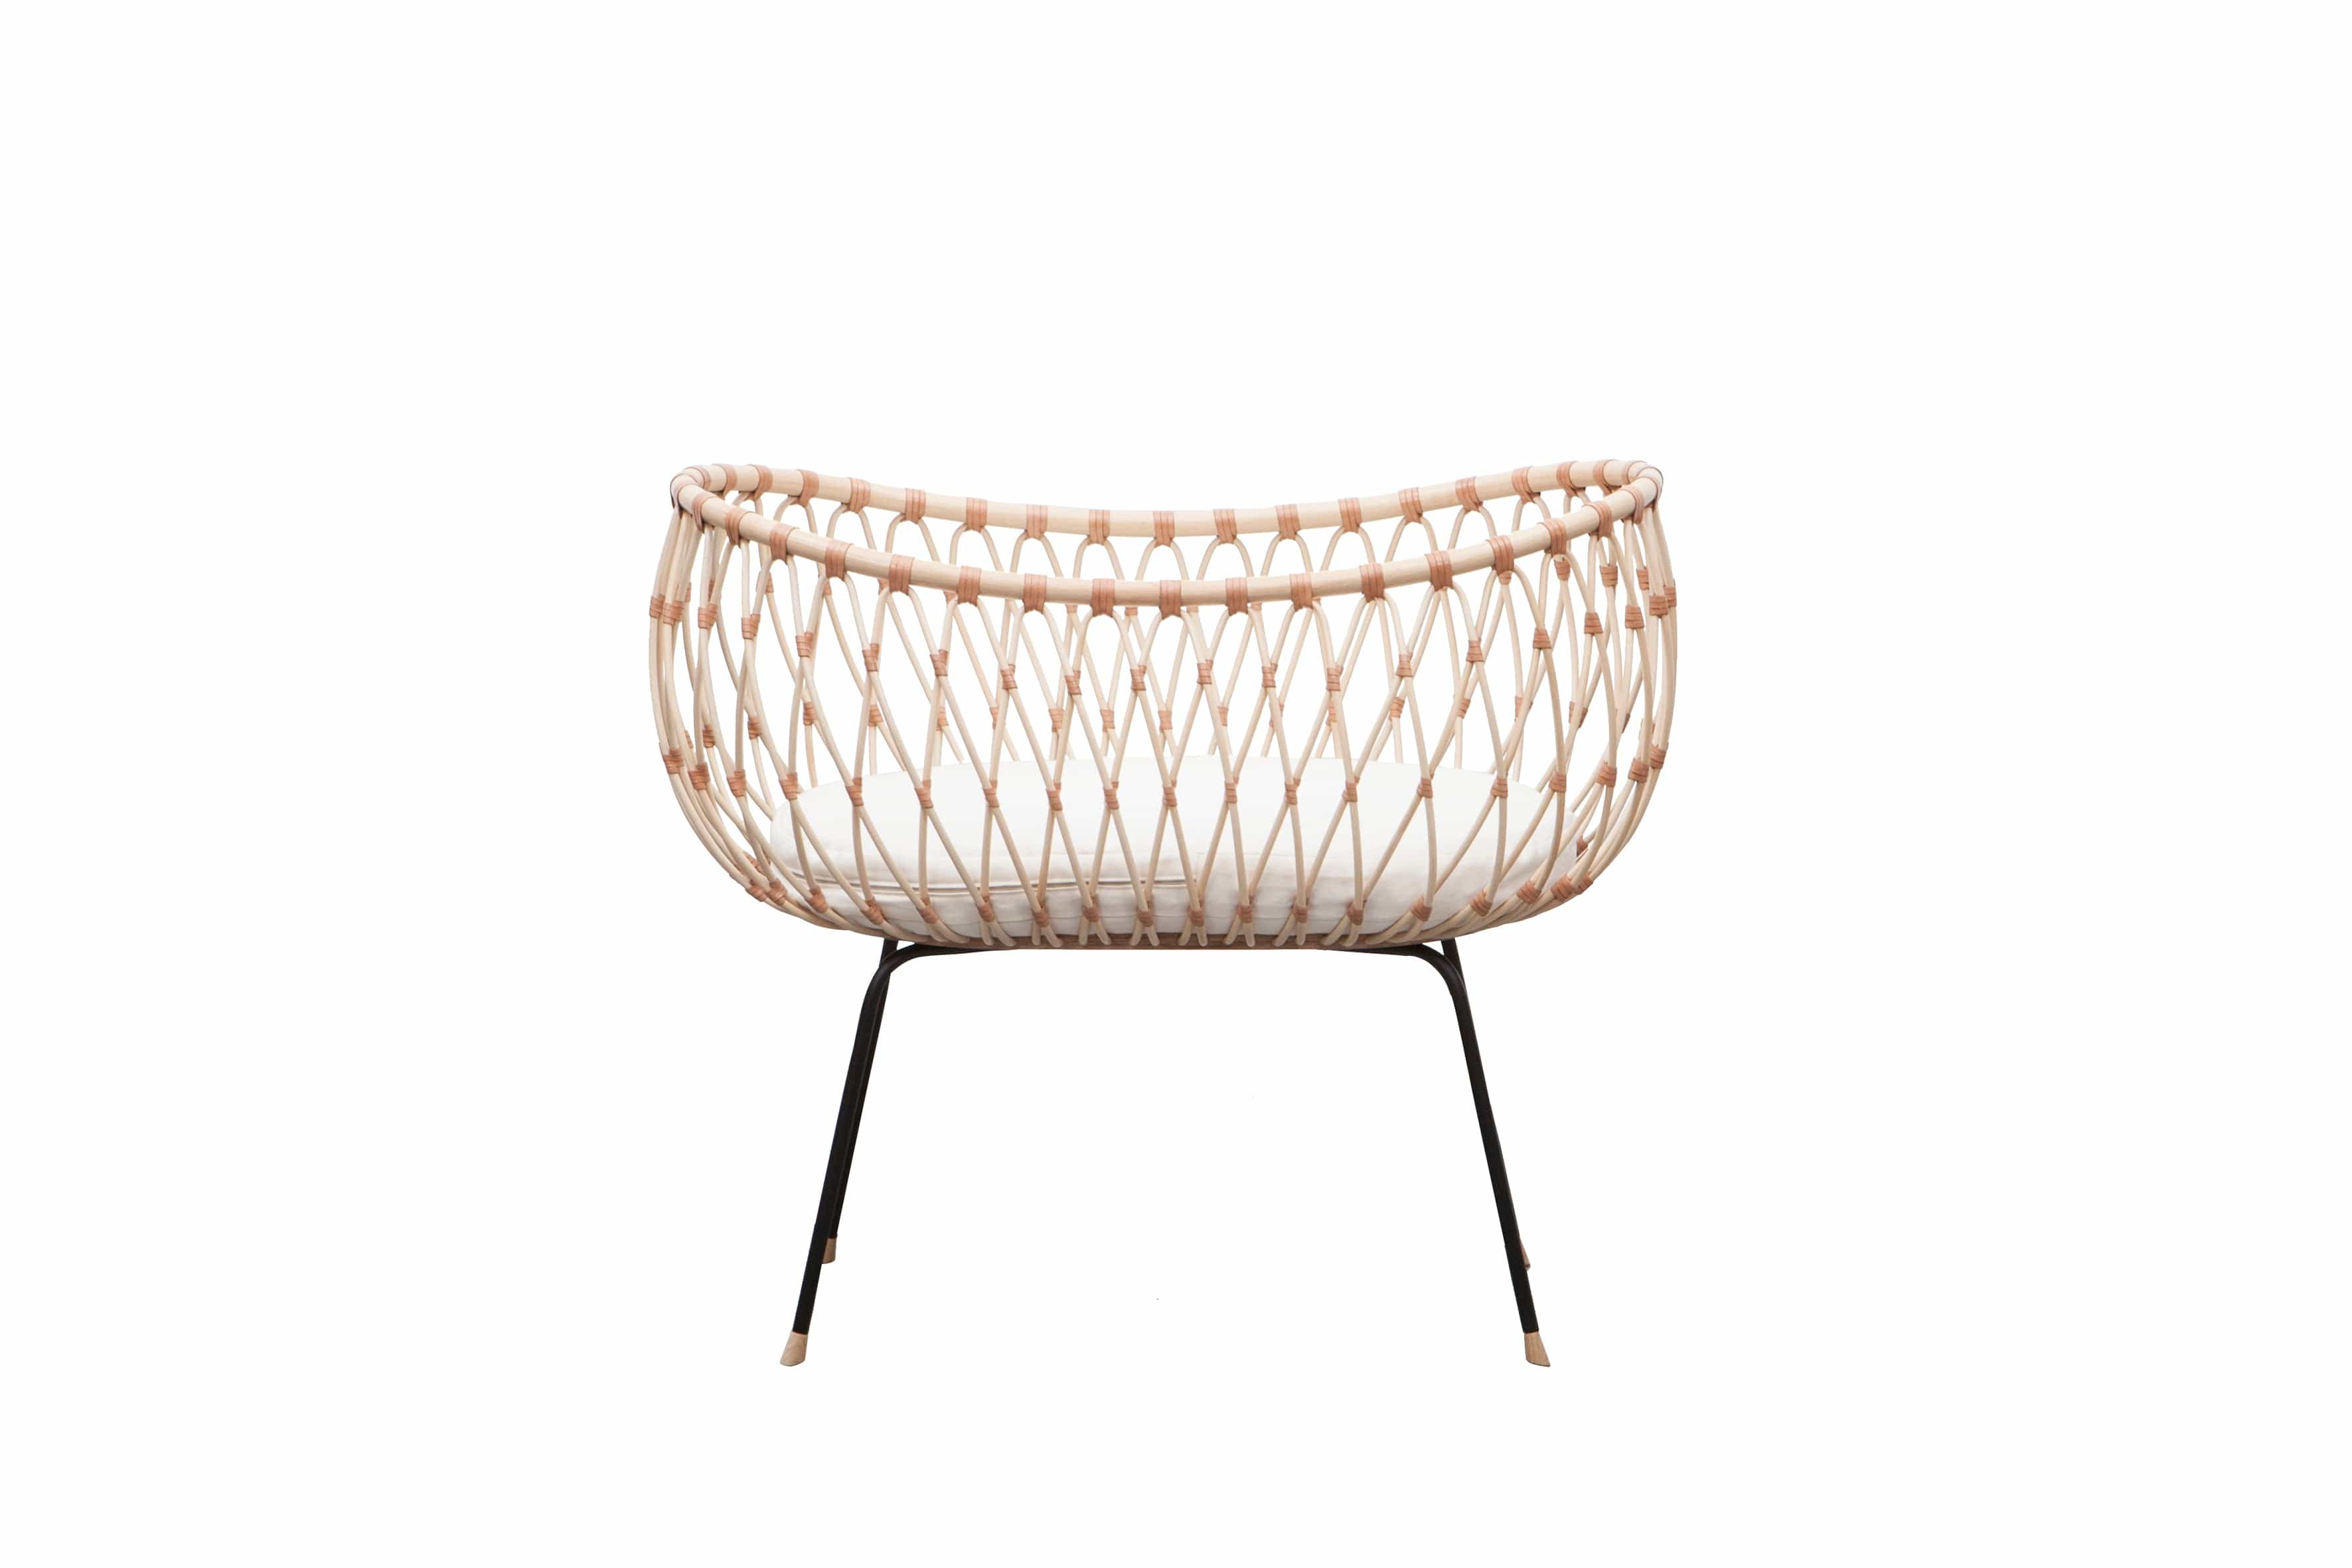 Round crib with outwards curved basket. Made of woven, light beige rattan beams, connected with light brown leather straps and standing on slim black metal legs. 